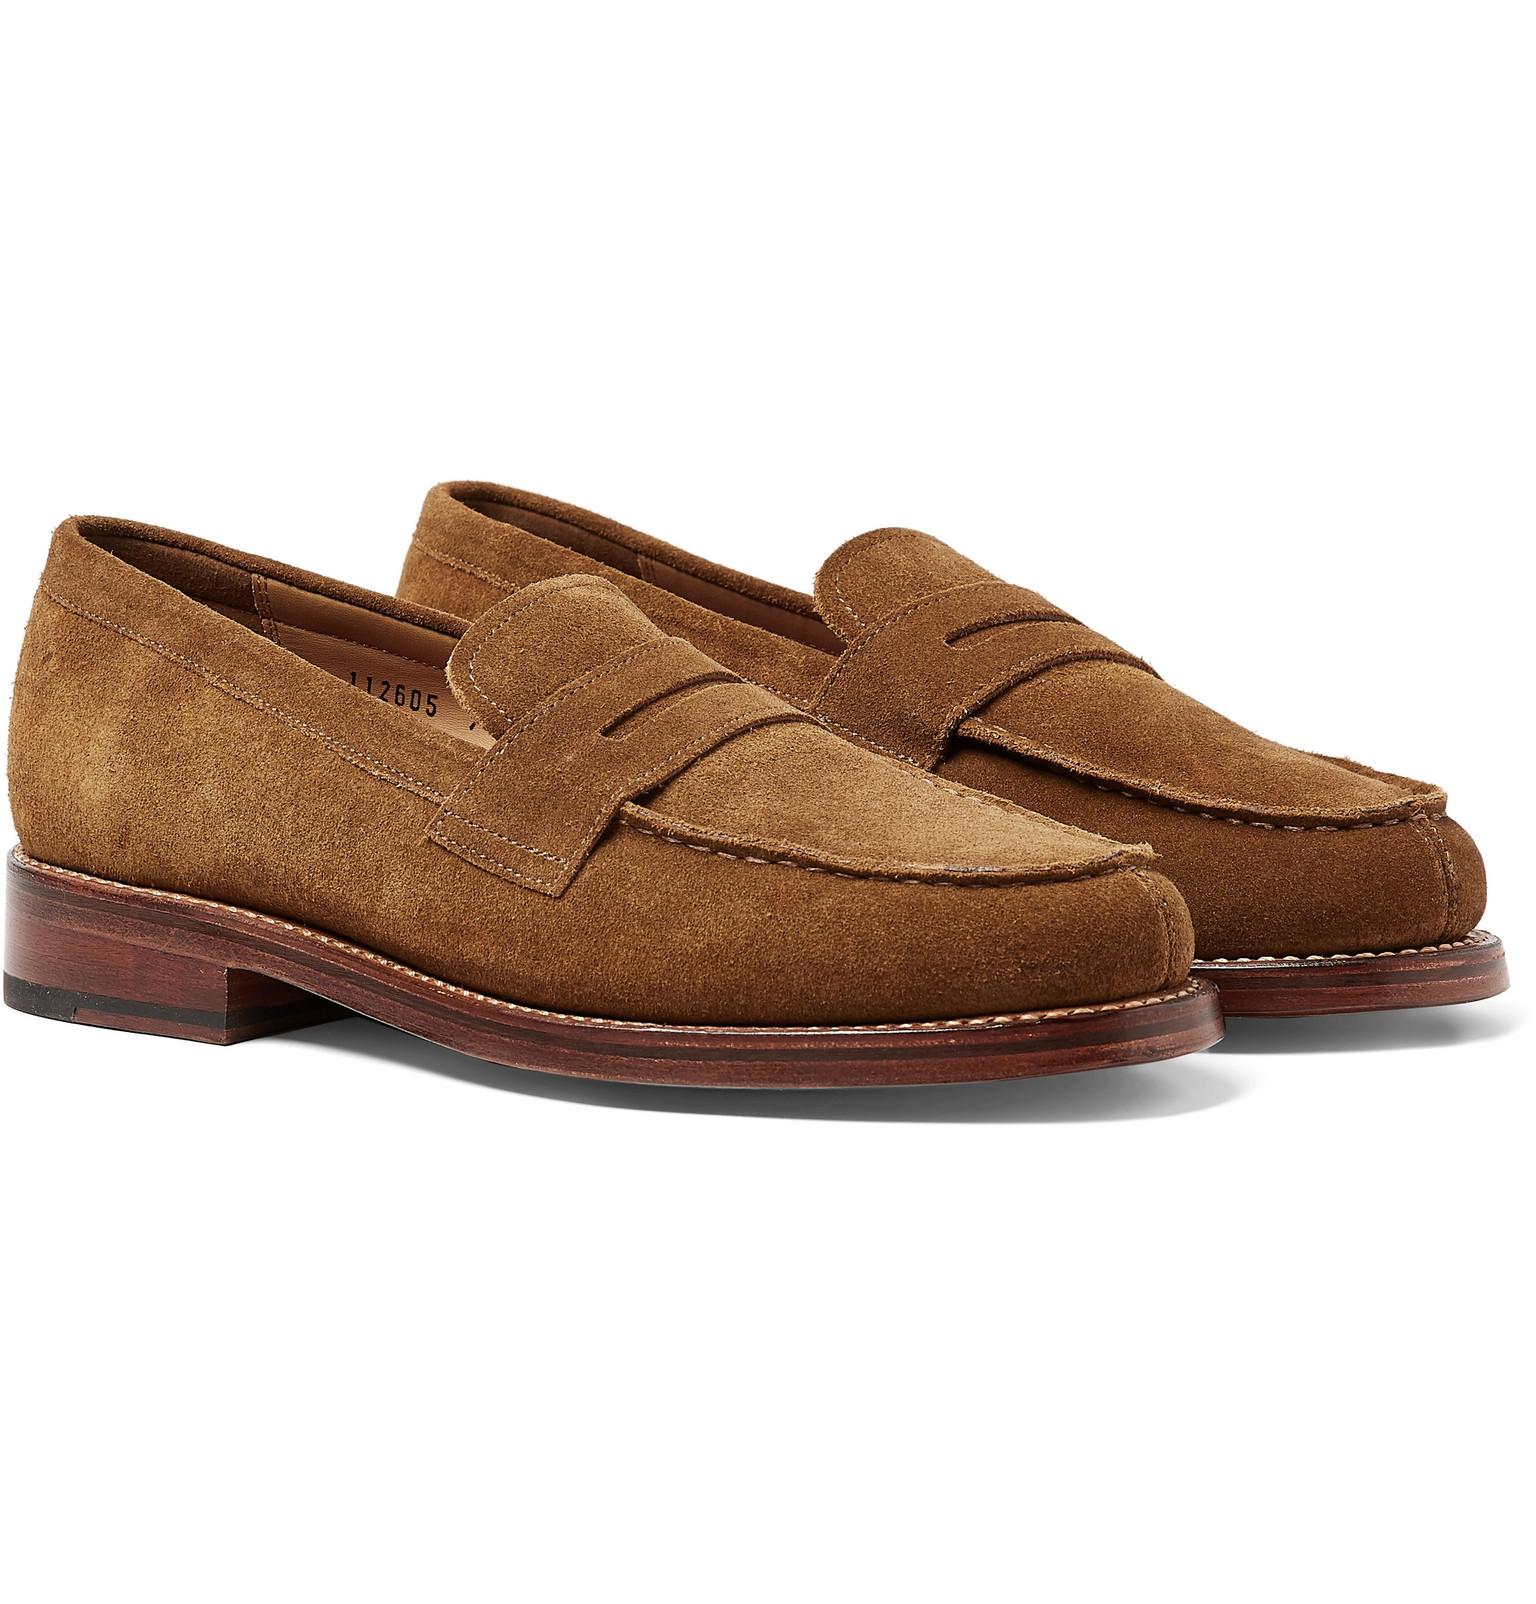 Grenson Peter Brushed-suede Penny Loafers in Brown for Men - Lyst